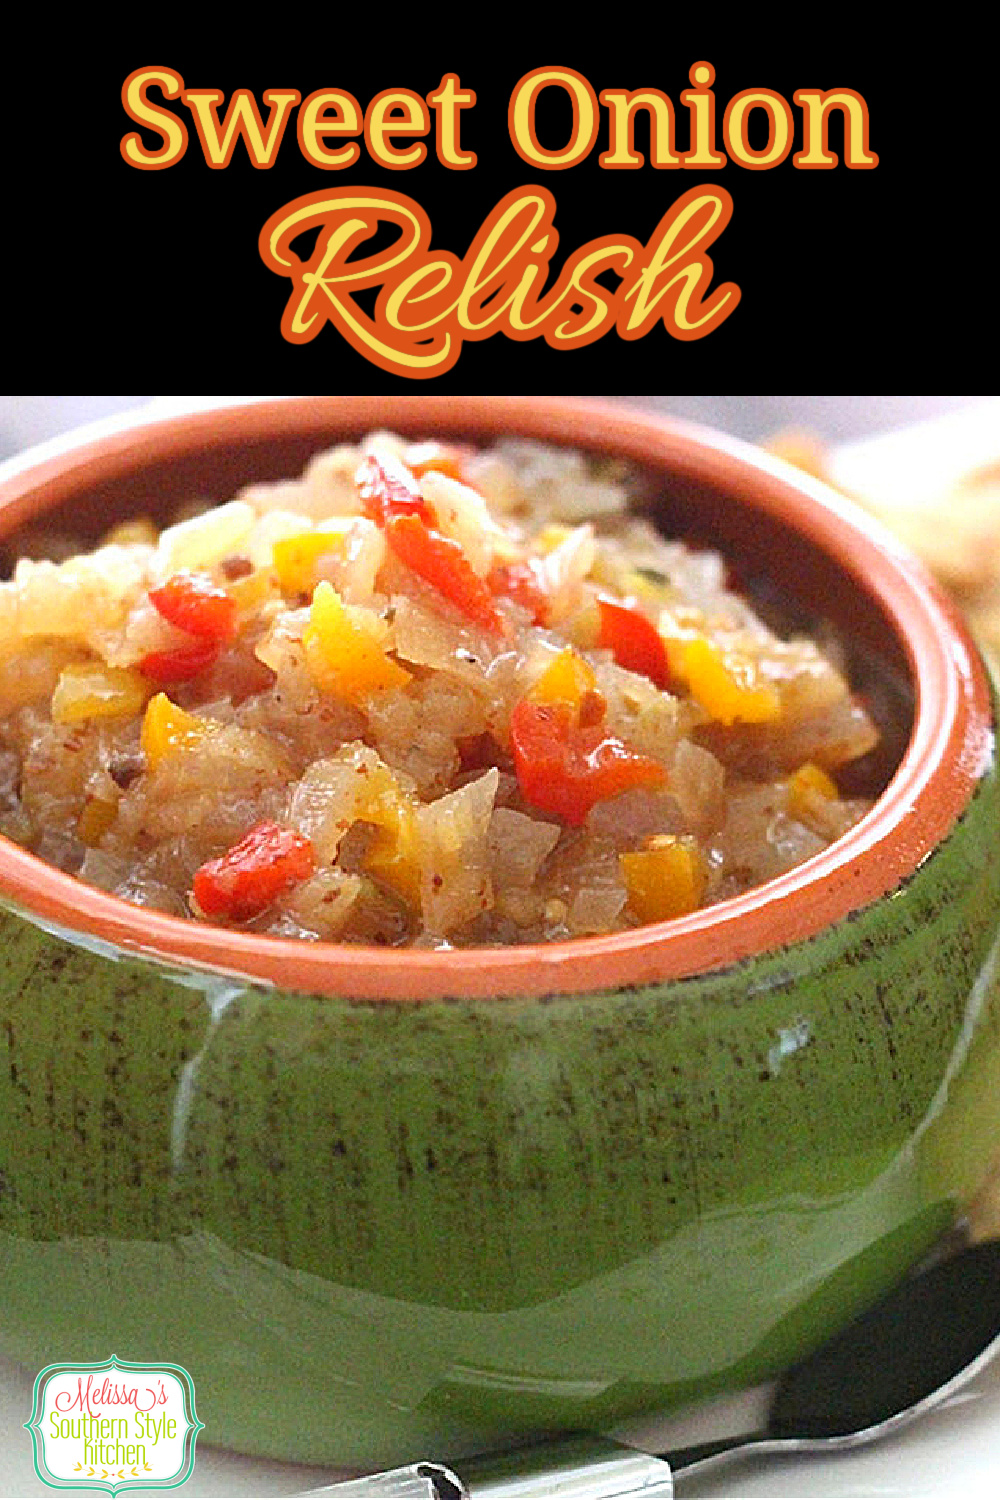 This sweet Onion Relish Recipe can be enjoyed on hot dogs, sandwiches, hamburgers or as a condiment for a bowl of pinto bean #onionrelish #vidaliaonions #relishrecipes #easyrelishrecipes #sweetonionrelish #vidaliaonions